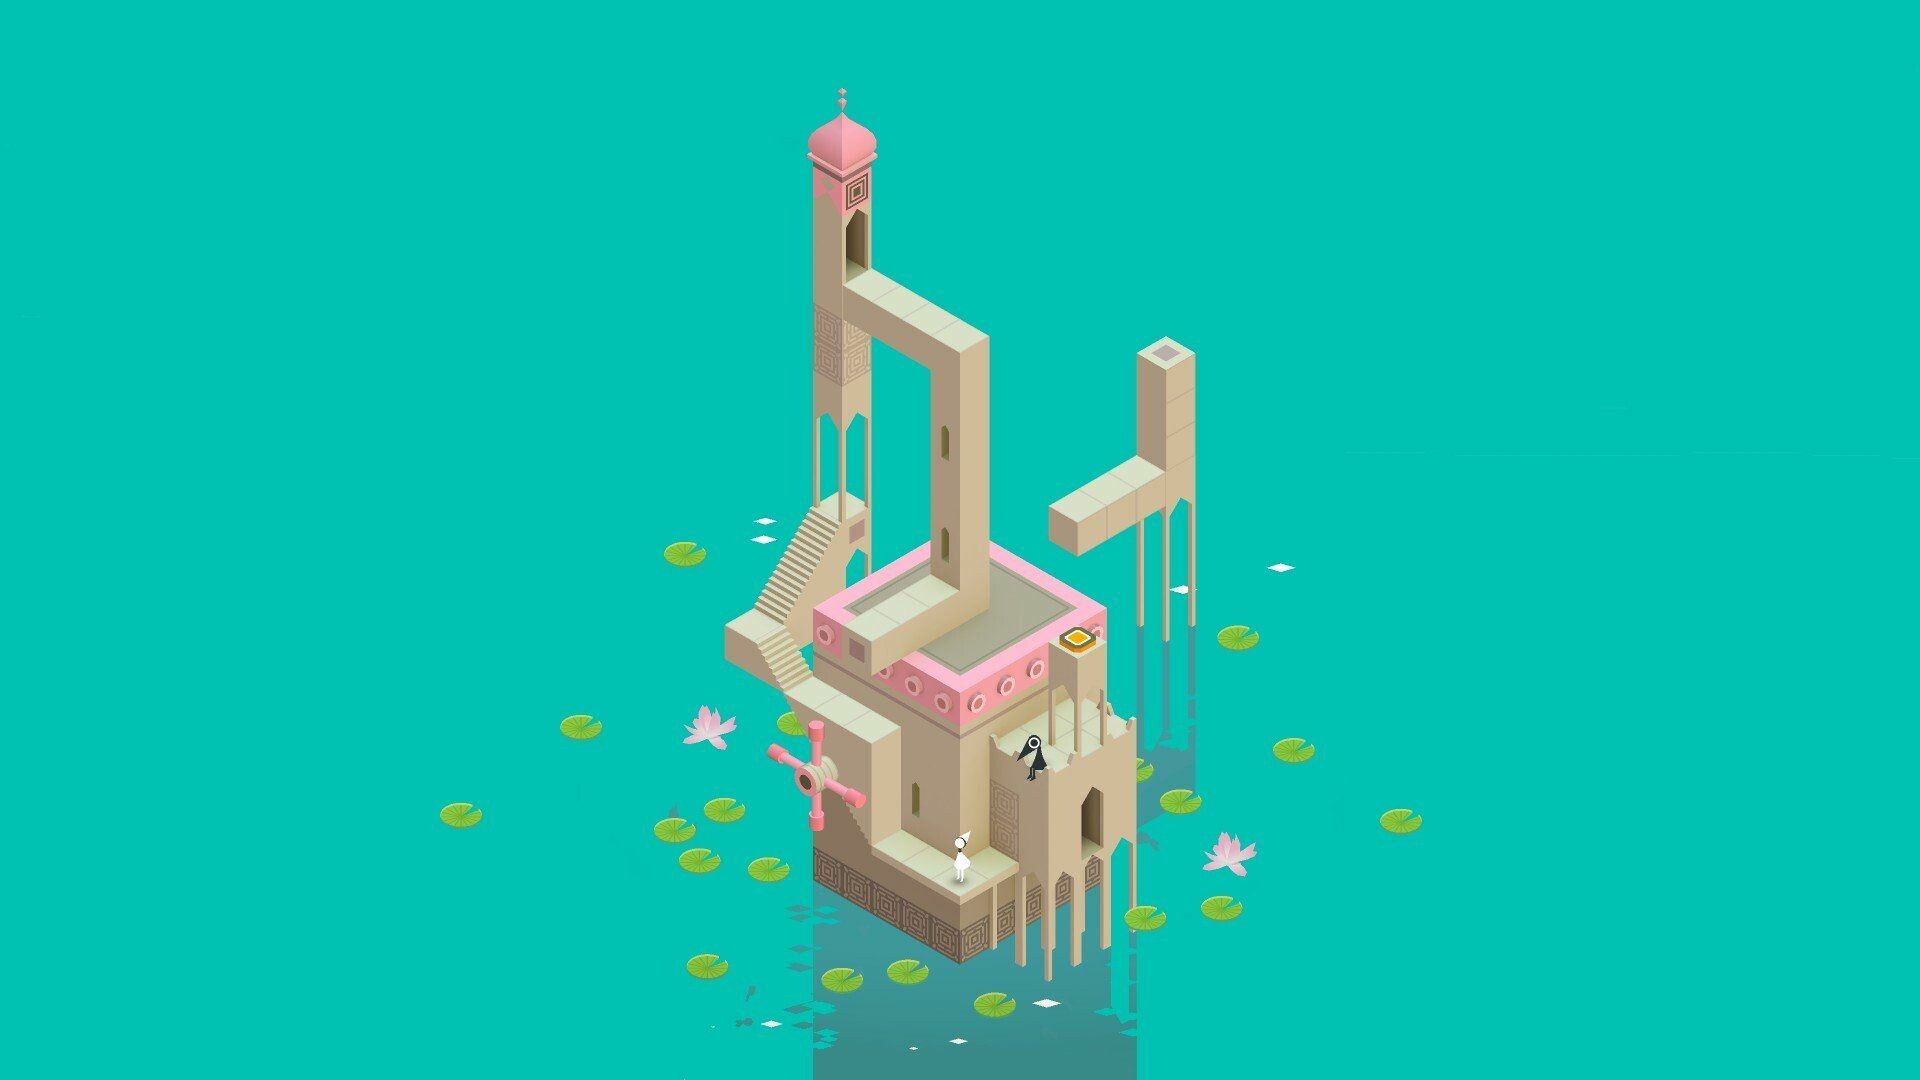 Monument Valley: Award-winning, meditative puzzle game, published by Ustwo Games. 1920x1080 Full HD Wallpaper.